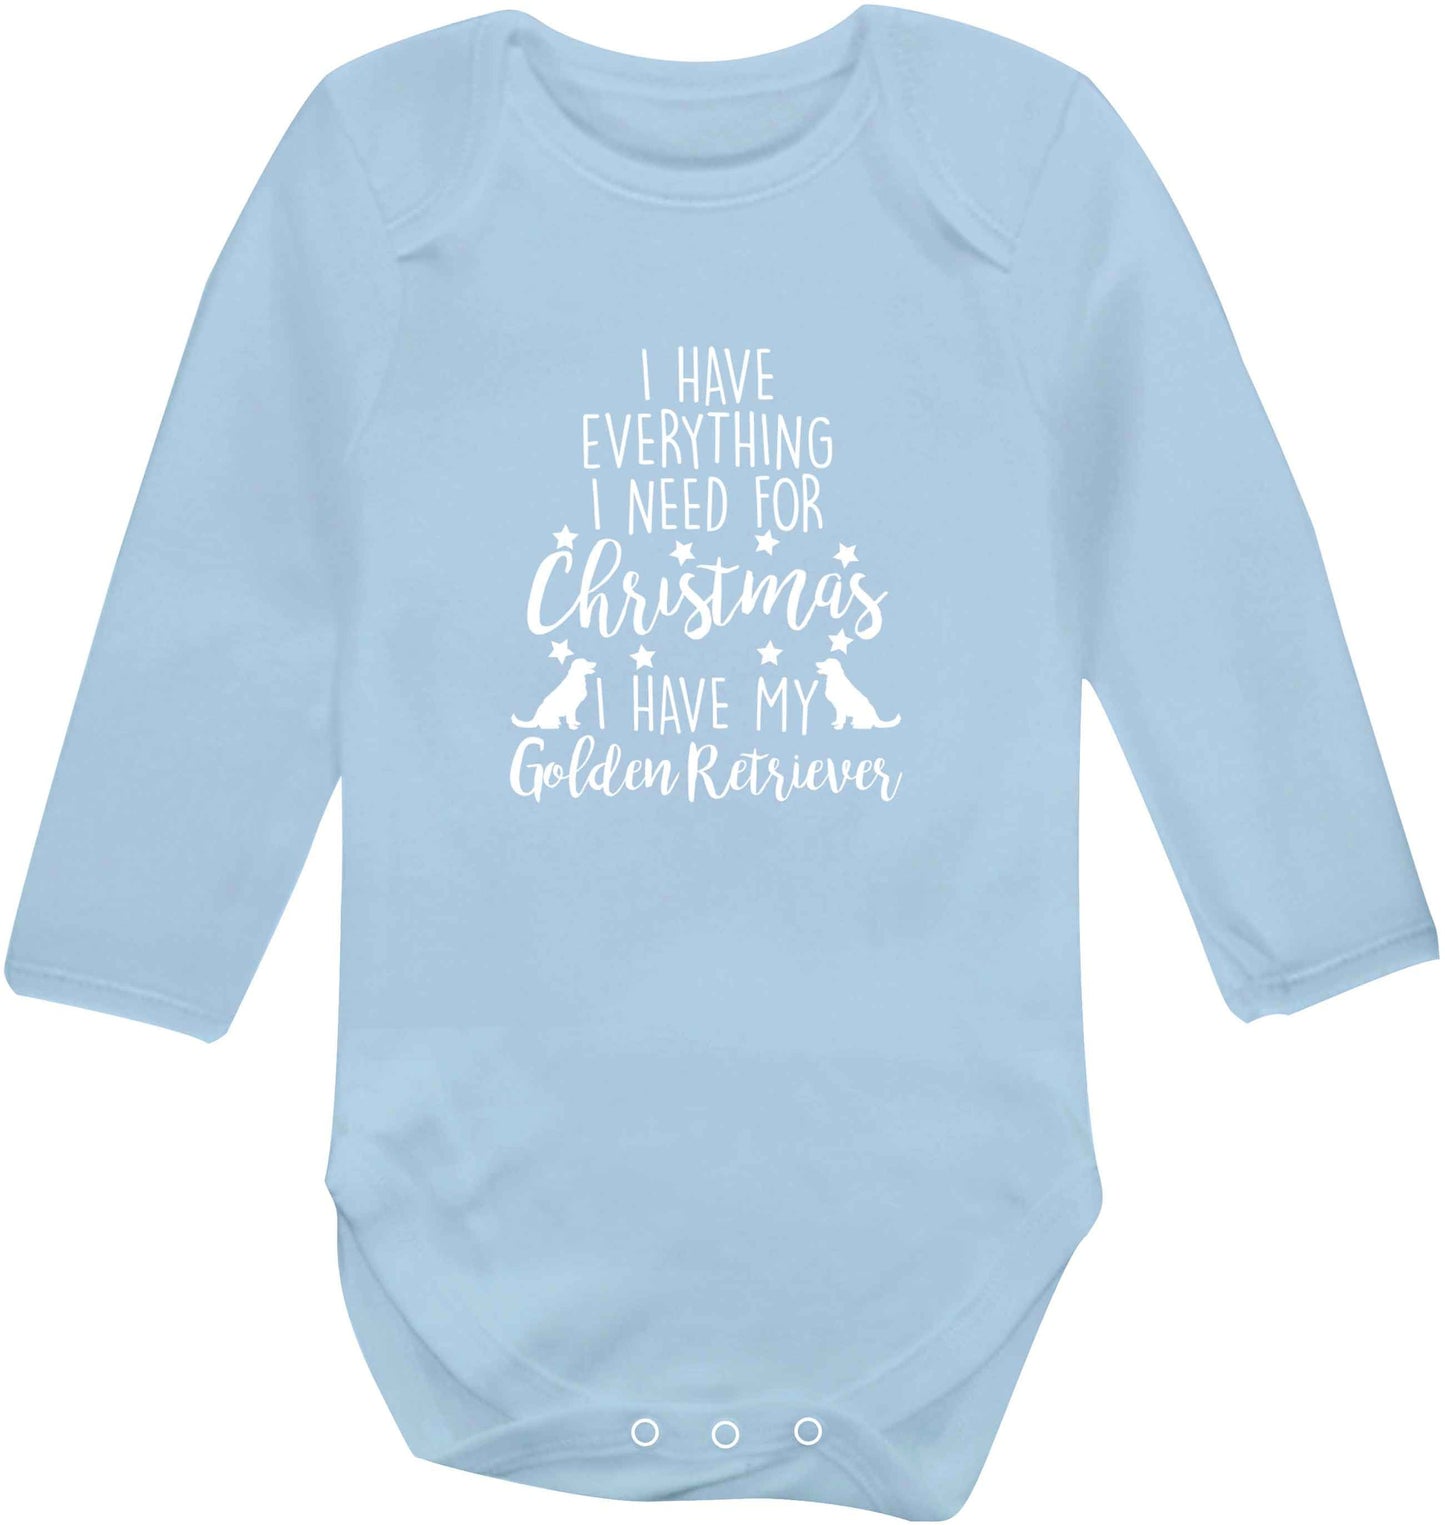 I have everything I need for Christmas I have my golden retriever baby vest long sleeved pale blue 6-12 months